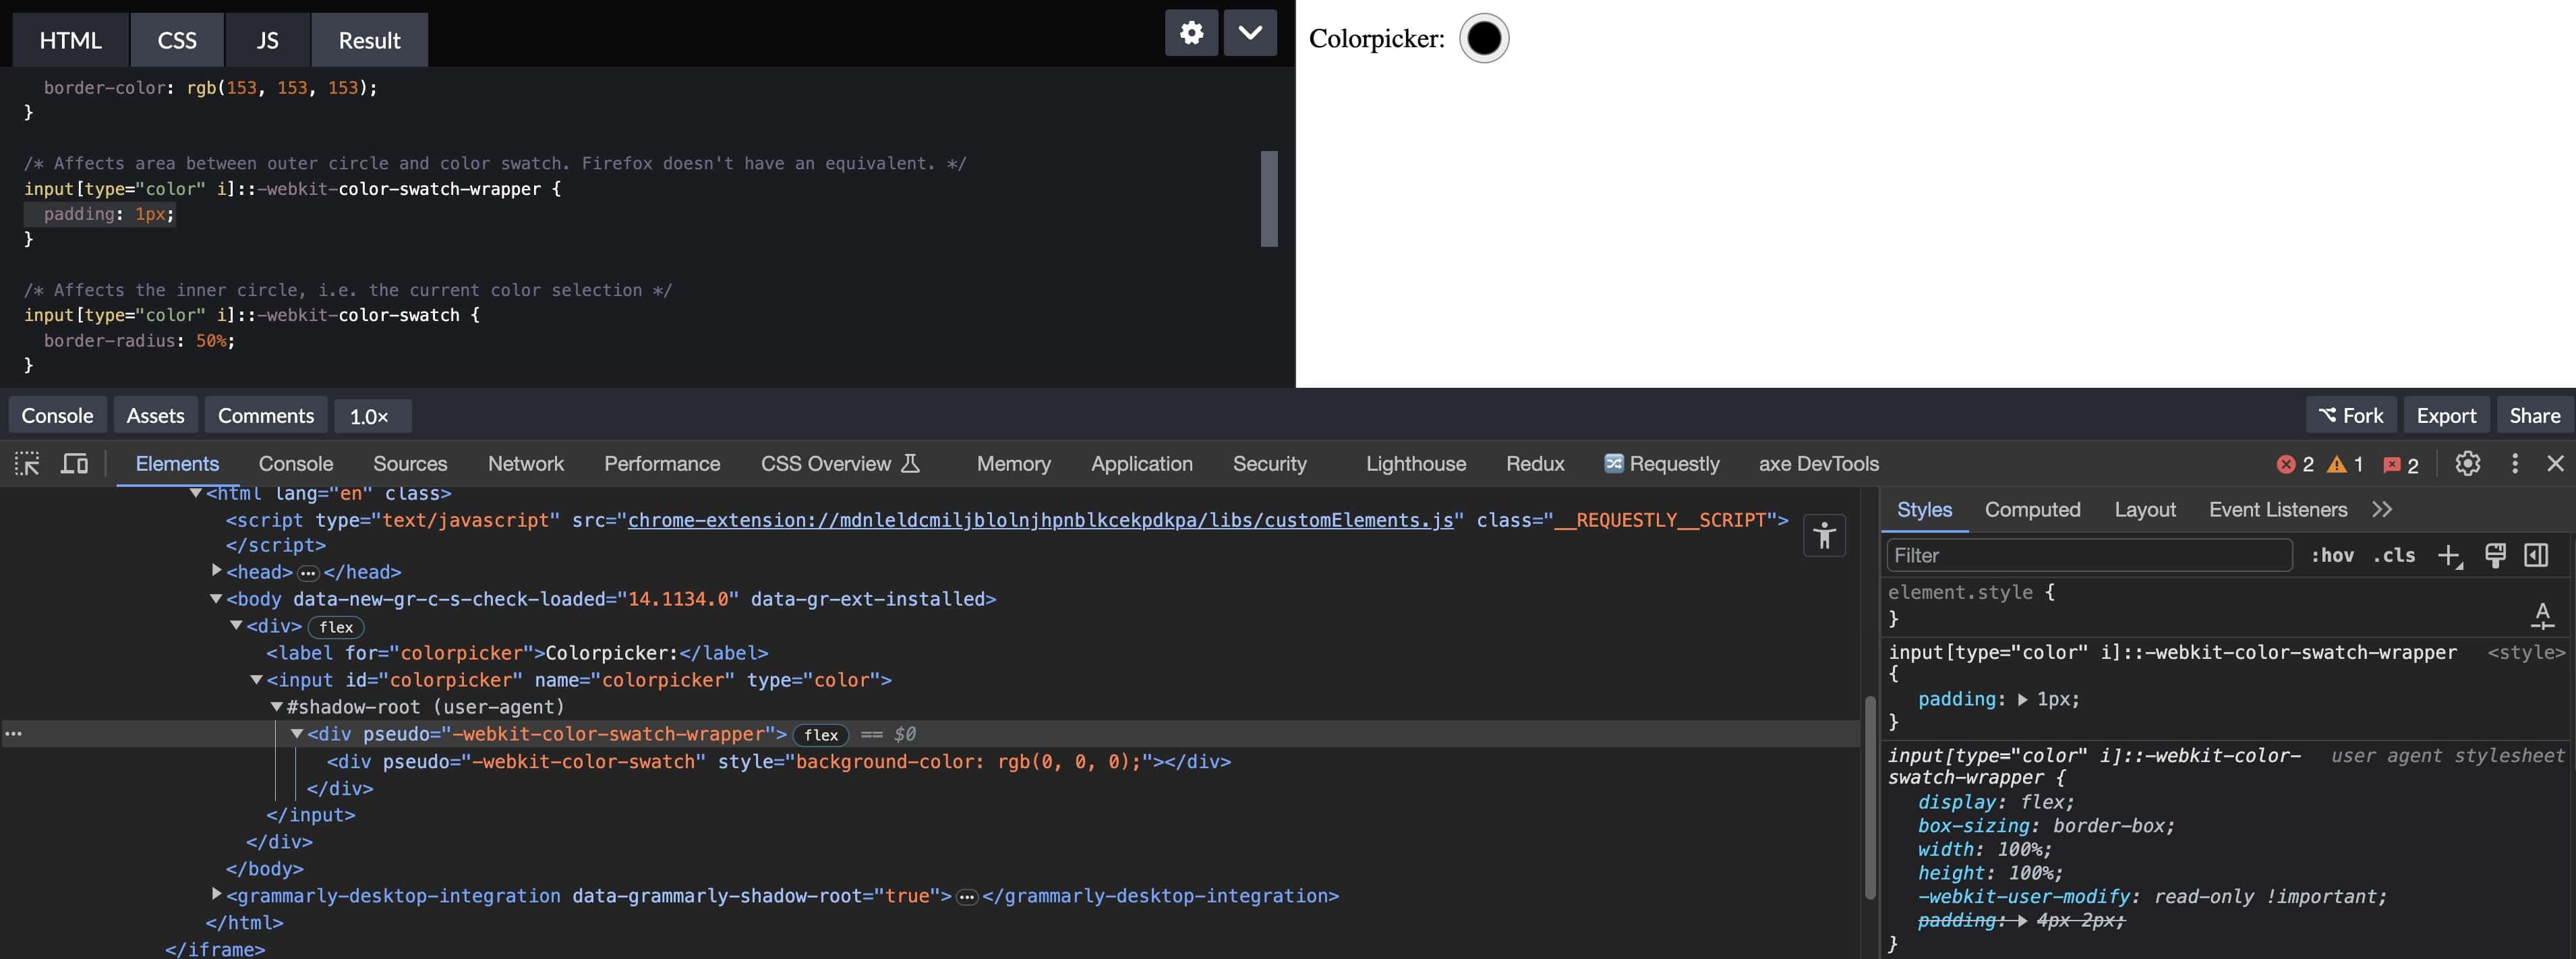 Screenshot of color input in Chrome with adjusted padding for -webkit-color-swatch-wrapper pseudoclass